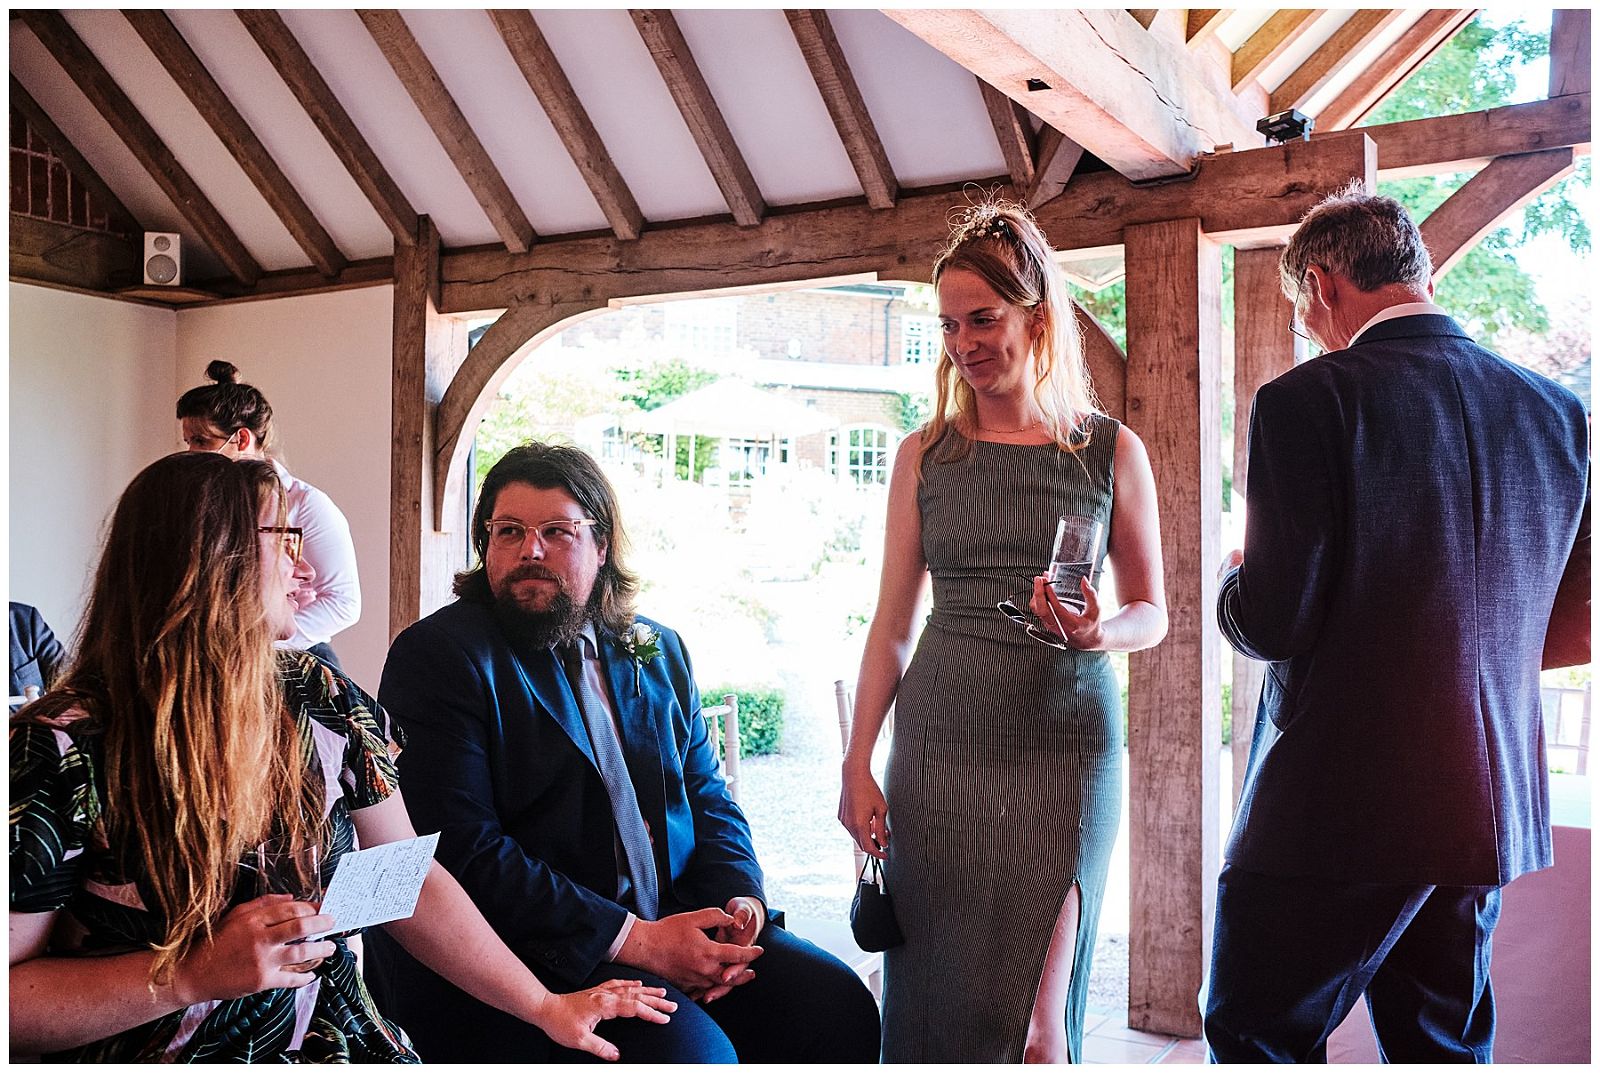 Documentary wedding photos that capturing the emotions and excitement leading up to the wedding ceremony at Goldstone Hall in Shropshire by Documentary Wedding Photographer Stuart James